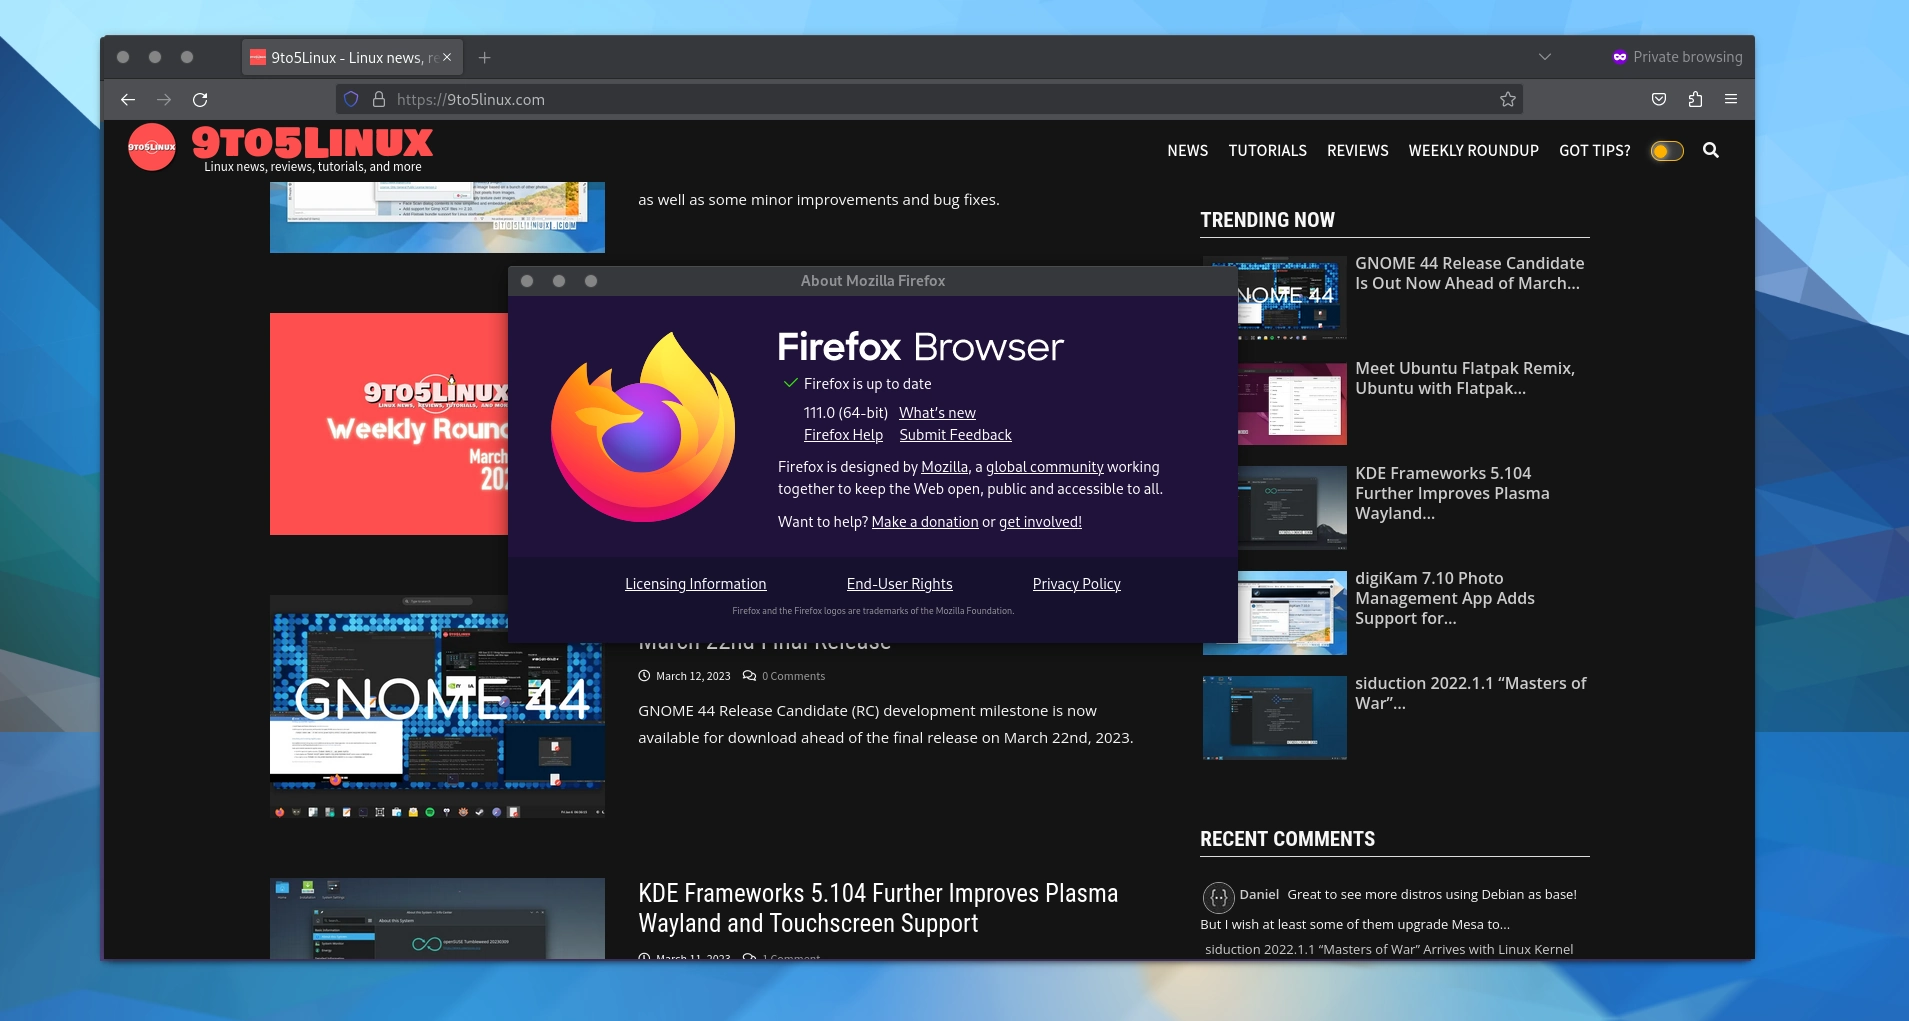 Firefox 111 Web Browser Is Now Available for Download, This Is What’s New